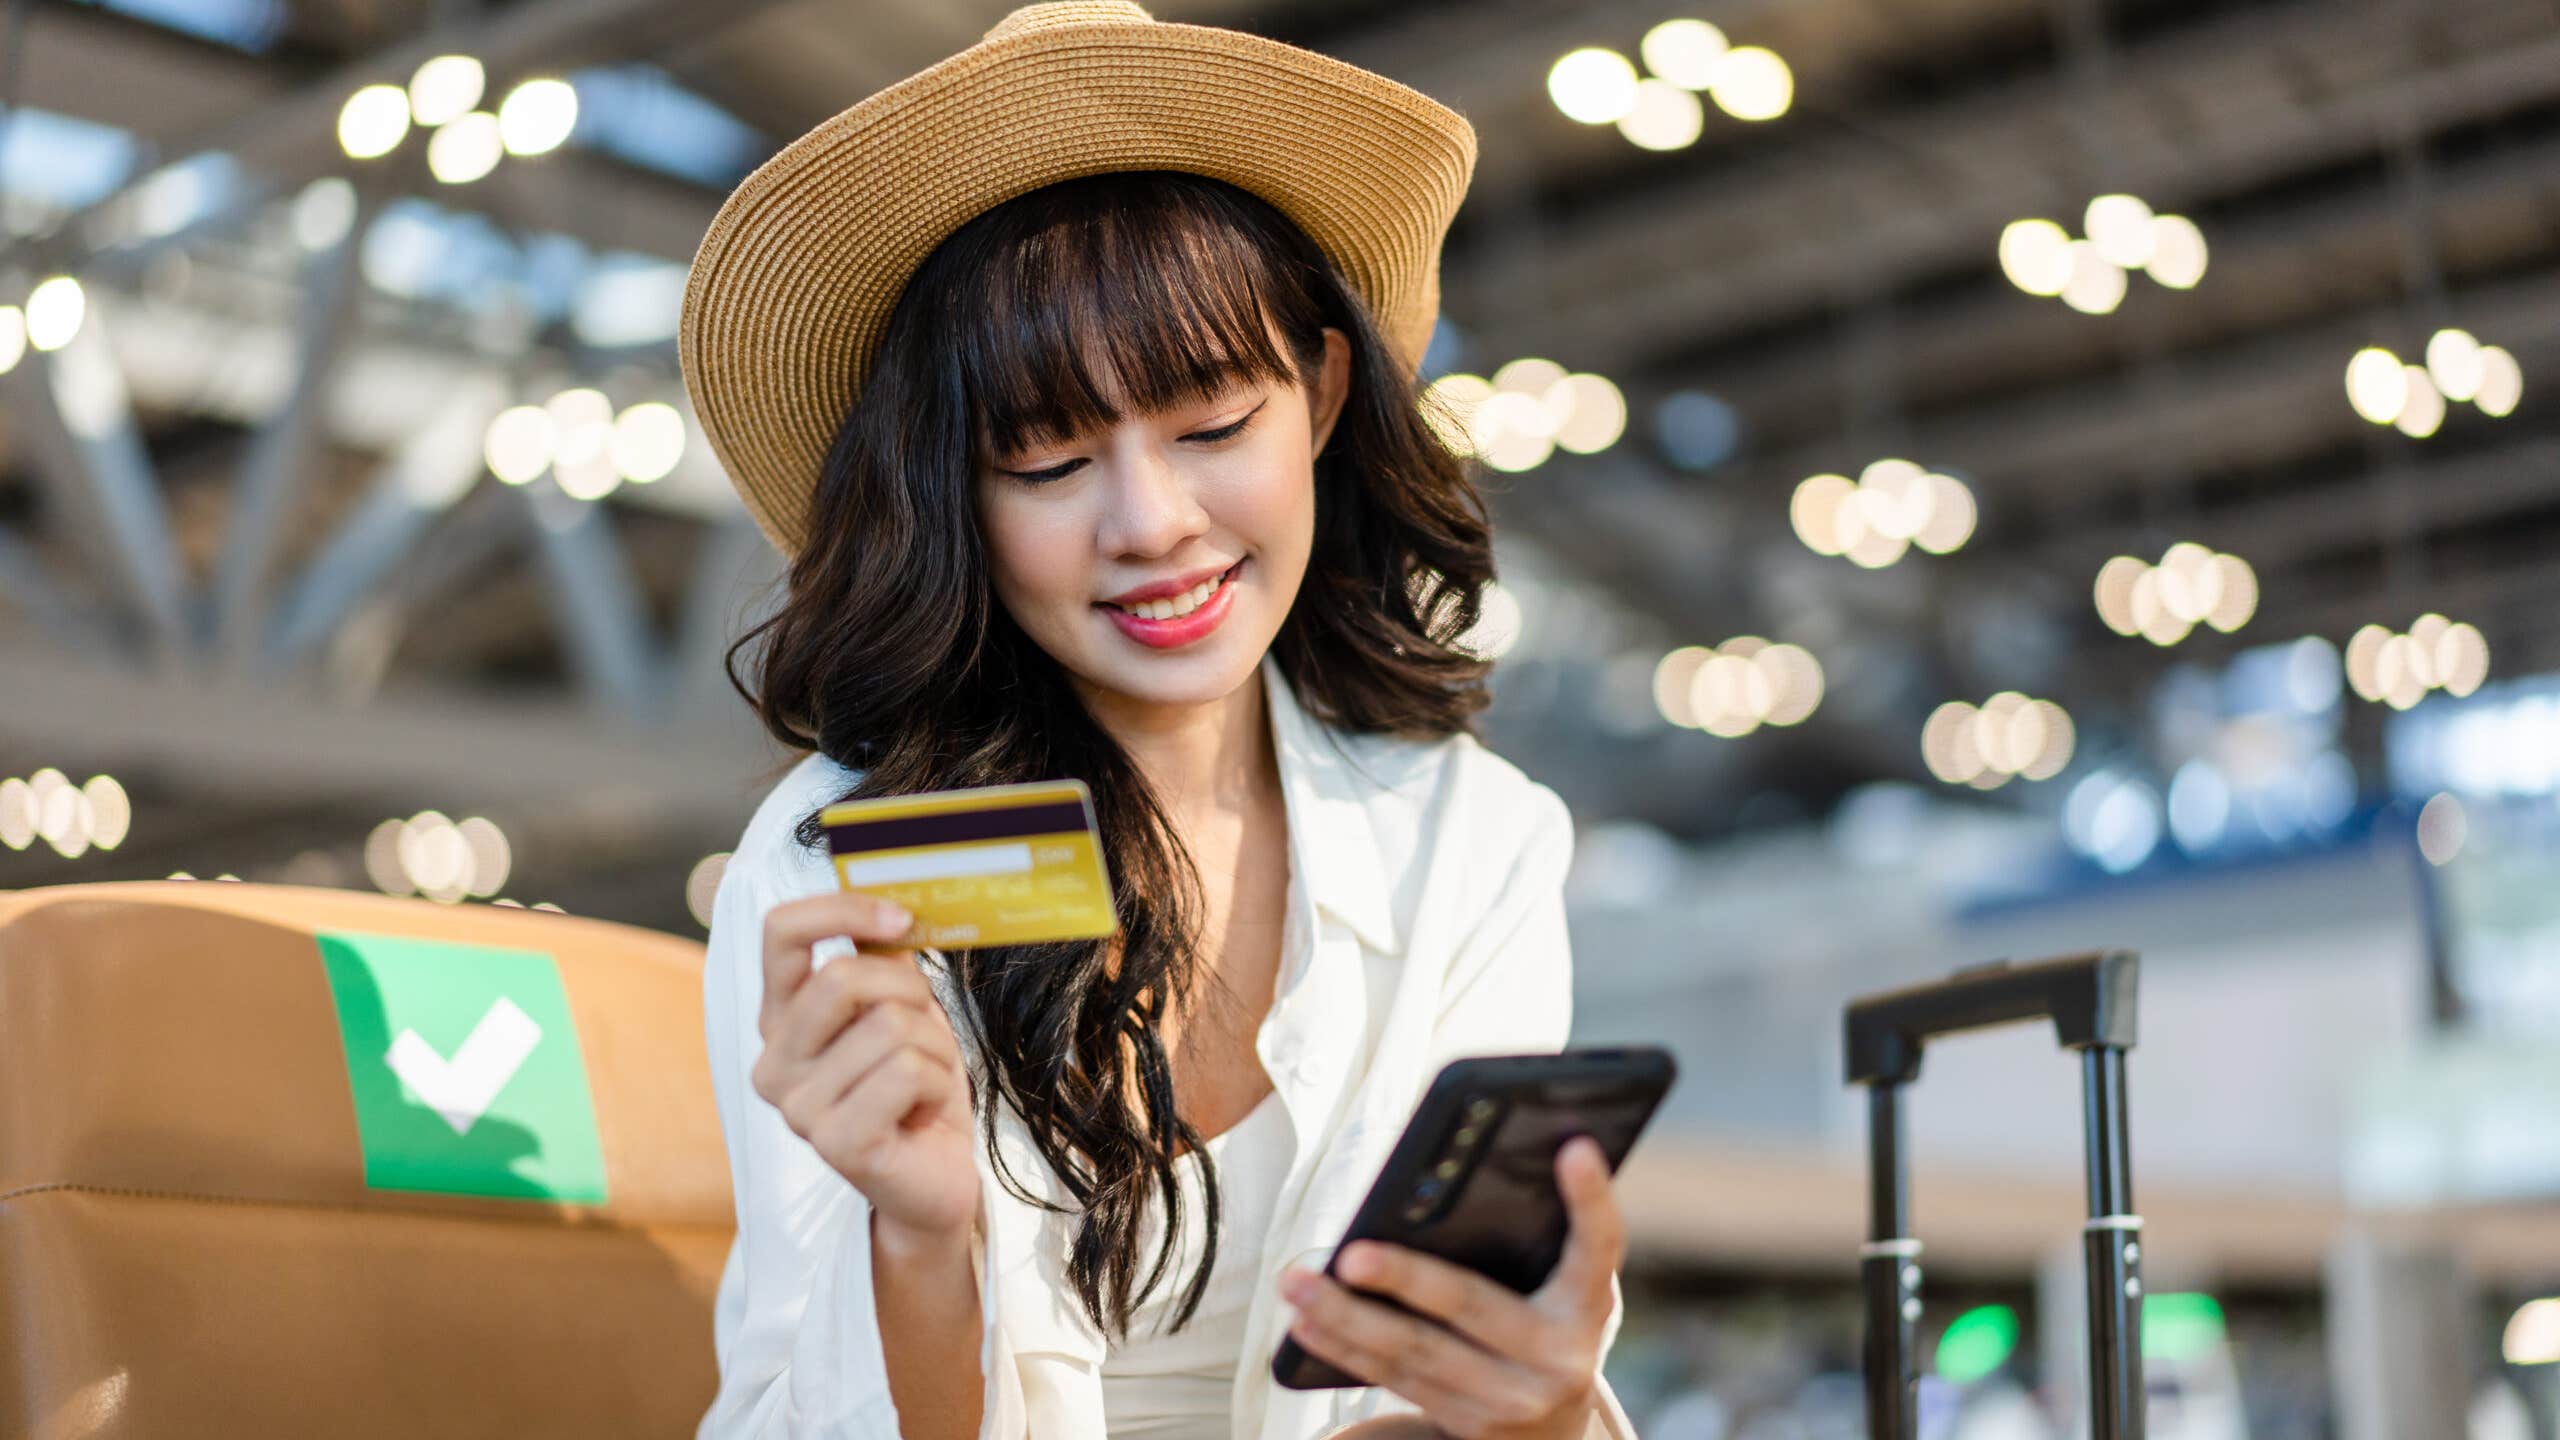 A girl using her smartphone to make a payment with a credit card.